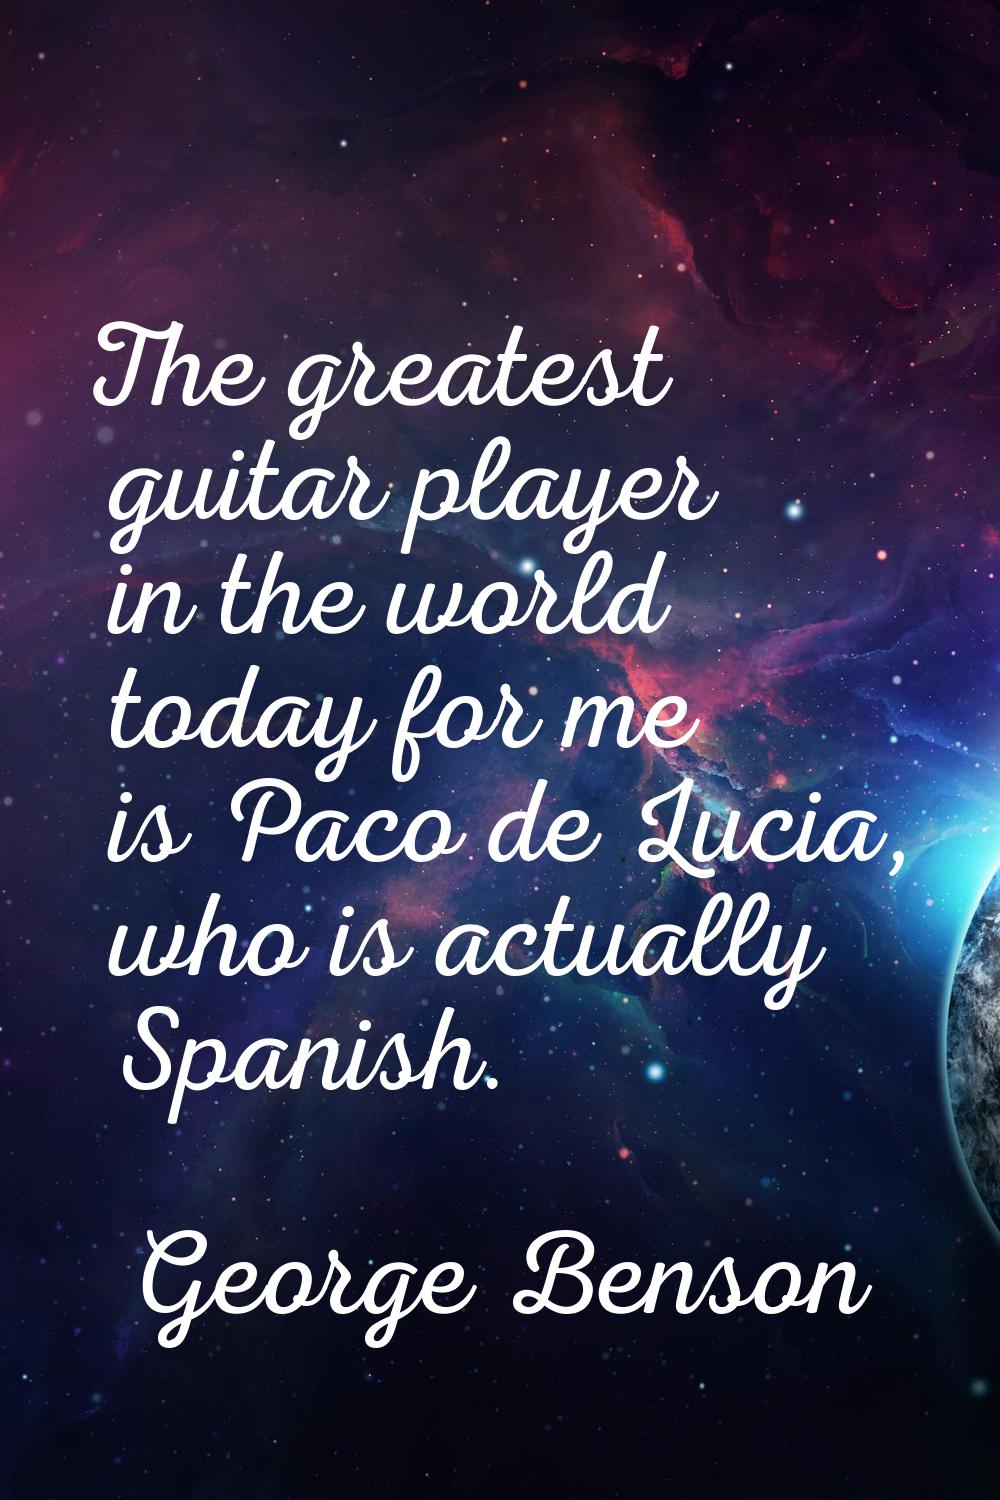 The greatest guitar player in the world today for me is Paco de Lucia, who is actually Spanish.